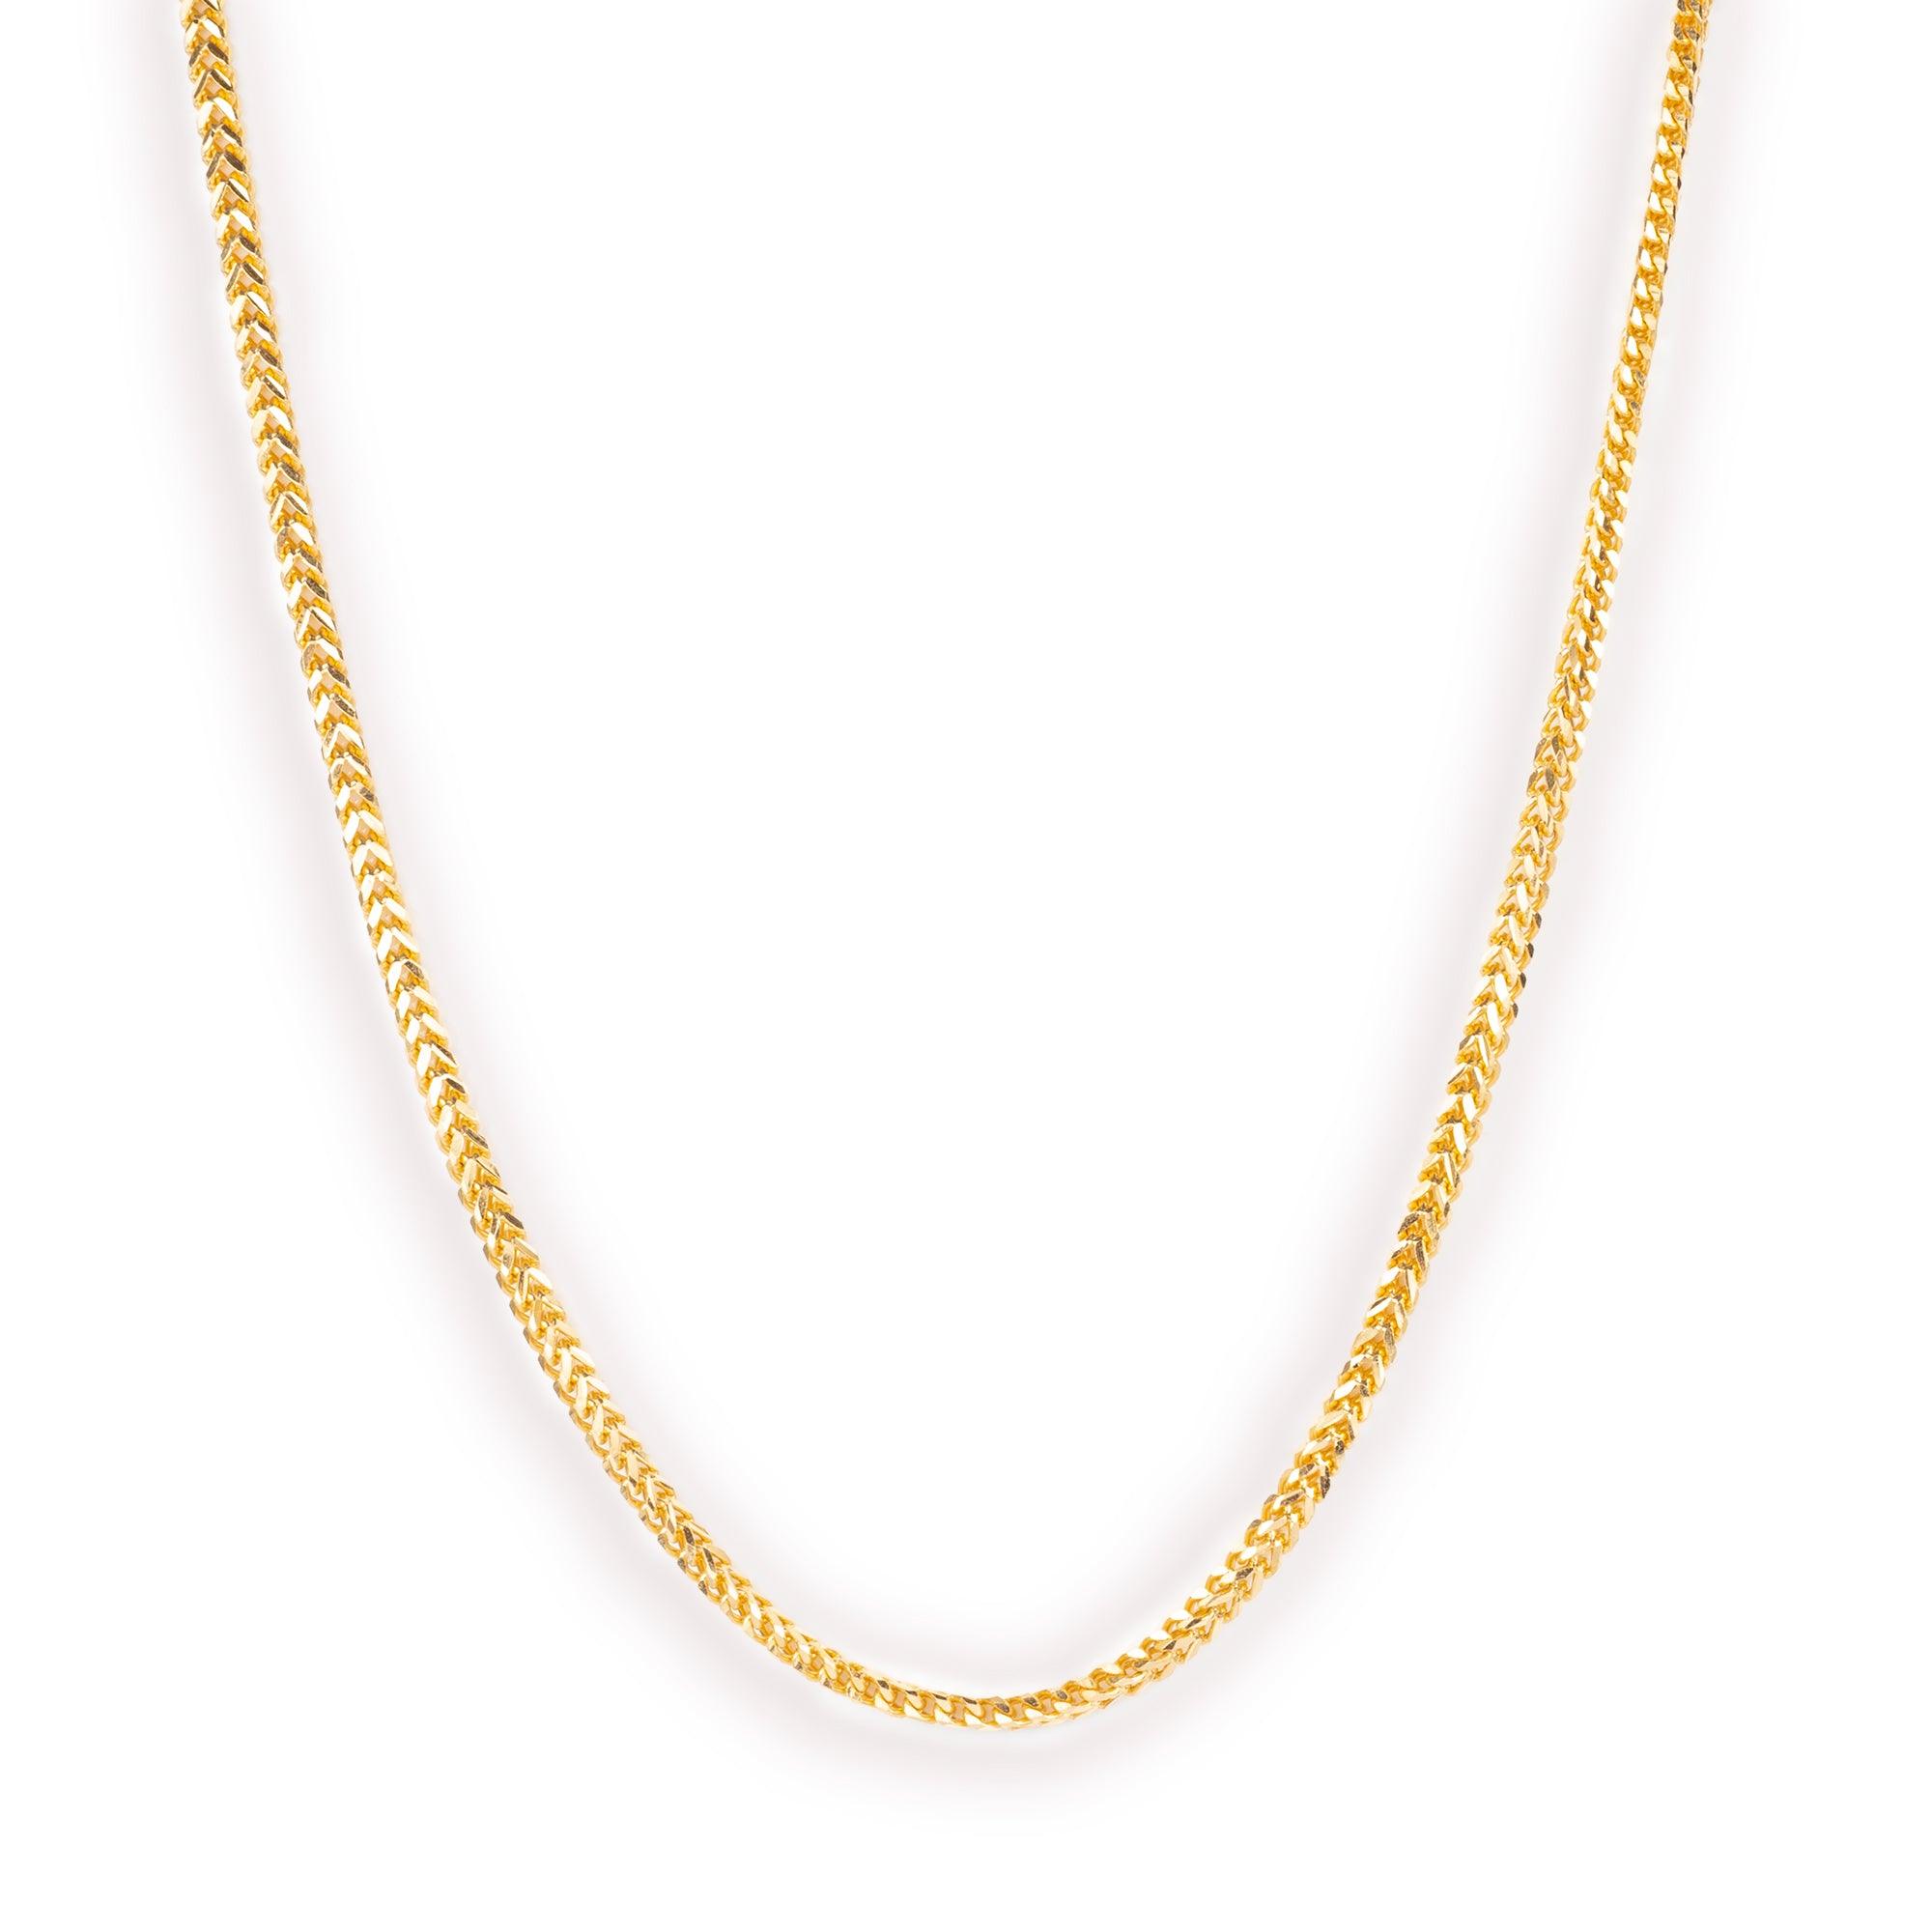 22ct Gold Foxtail Chain with Lobster Clasp C-3461 - Minar Jewellers